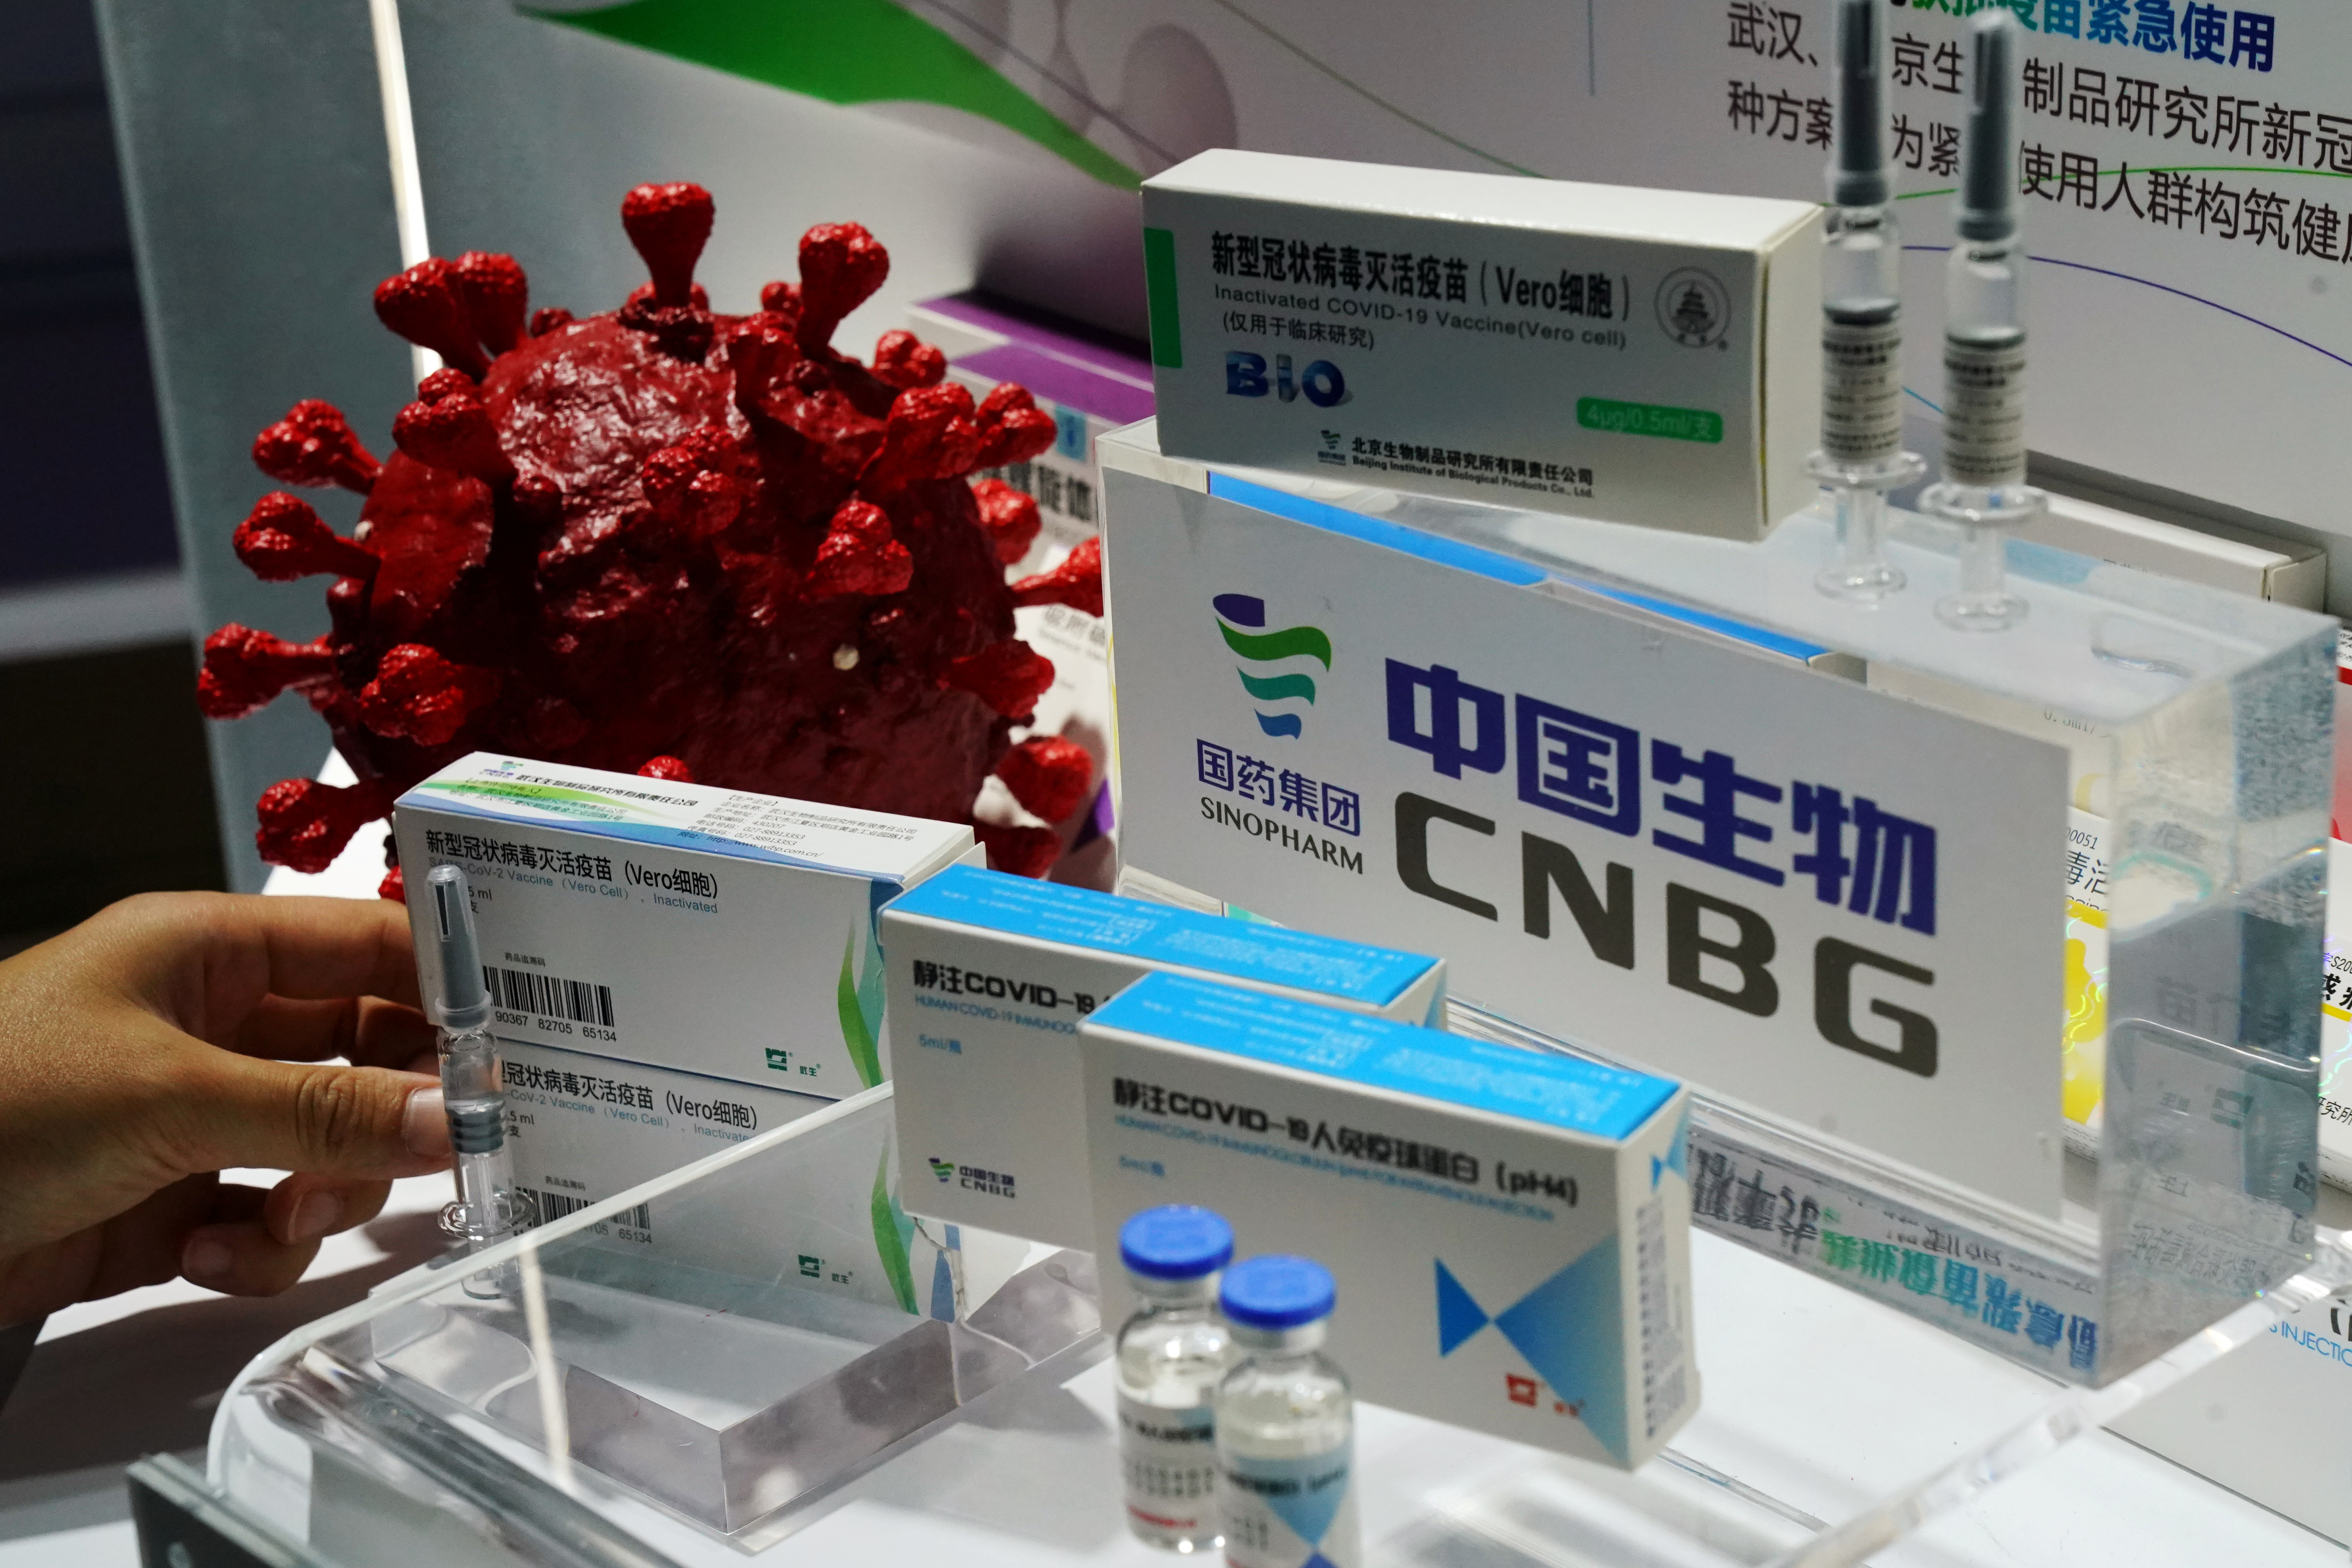 Booth displaying coronavirus vaccine candidate from CNBG in Beijing